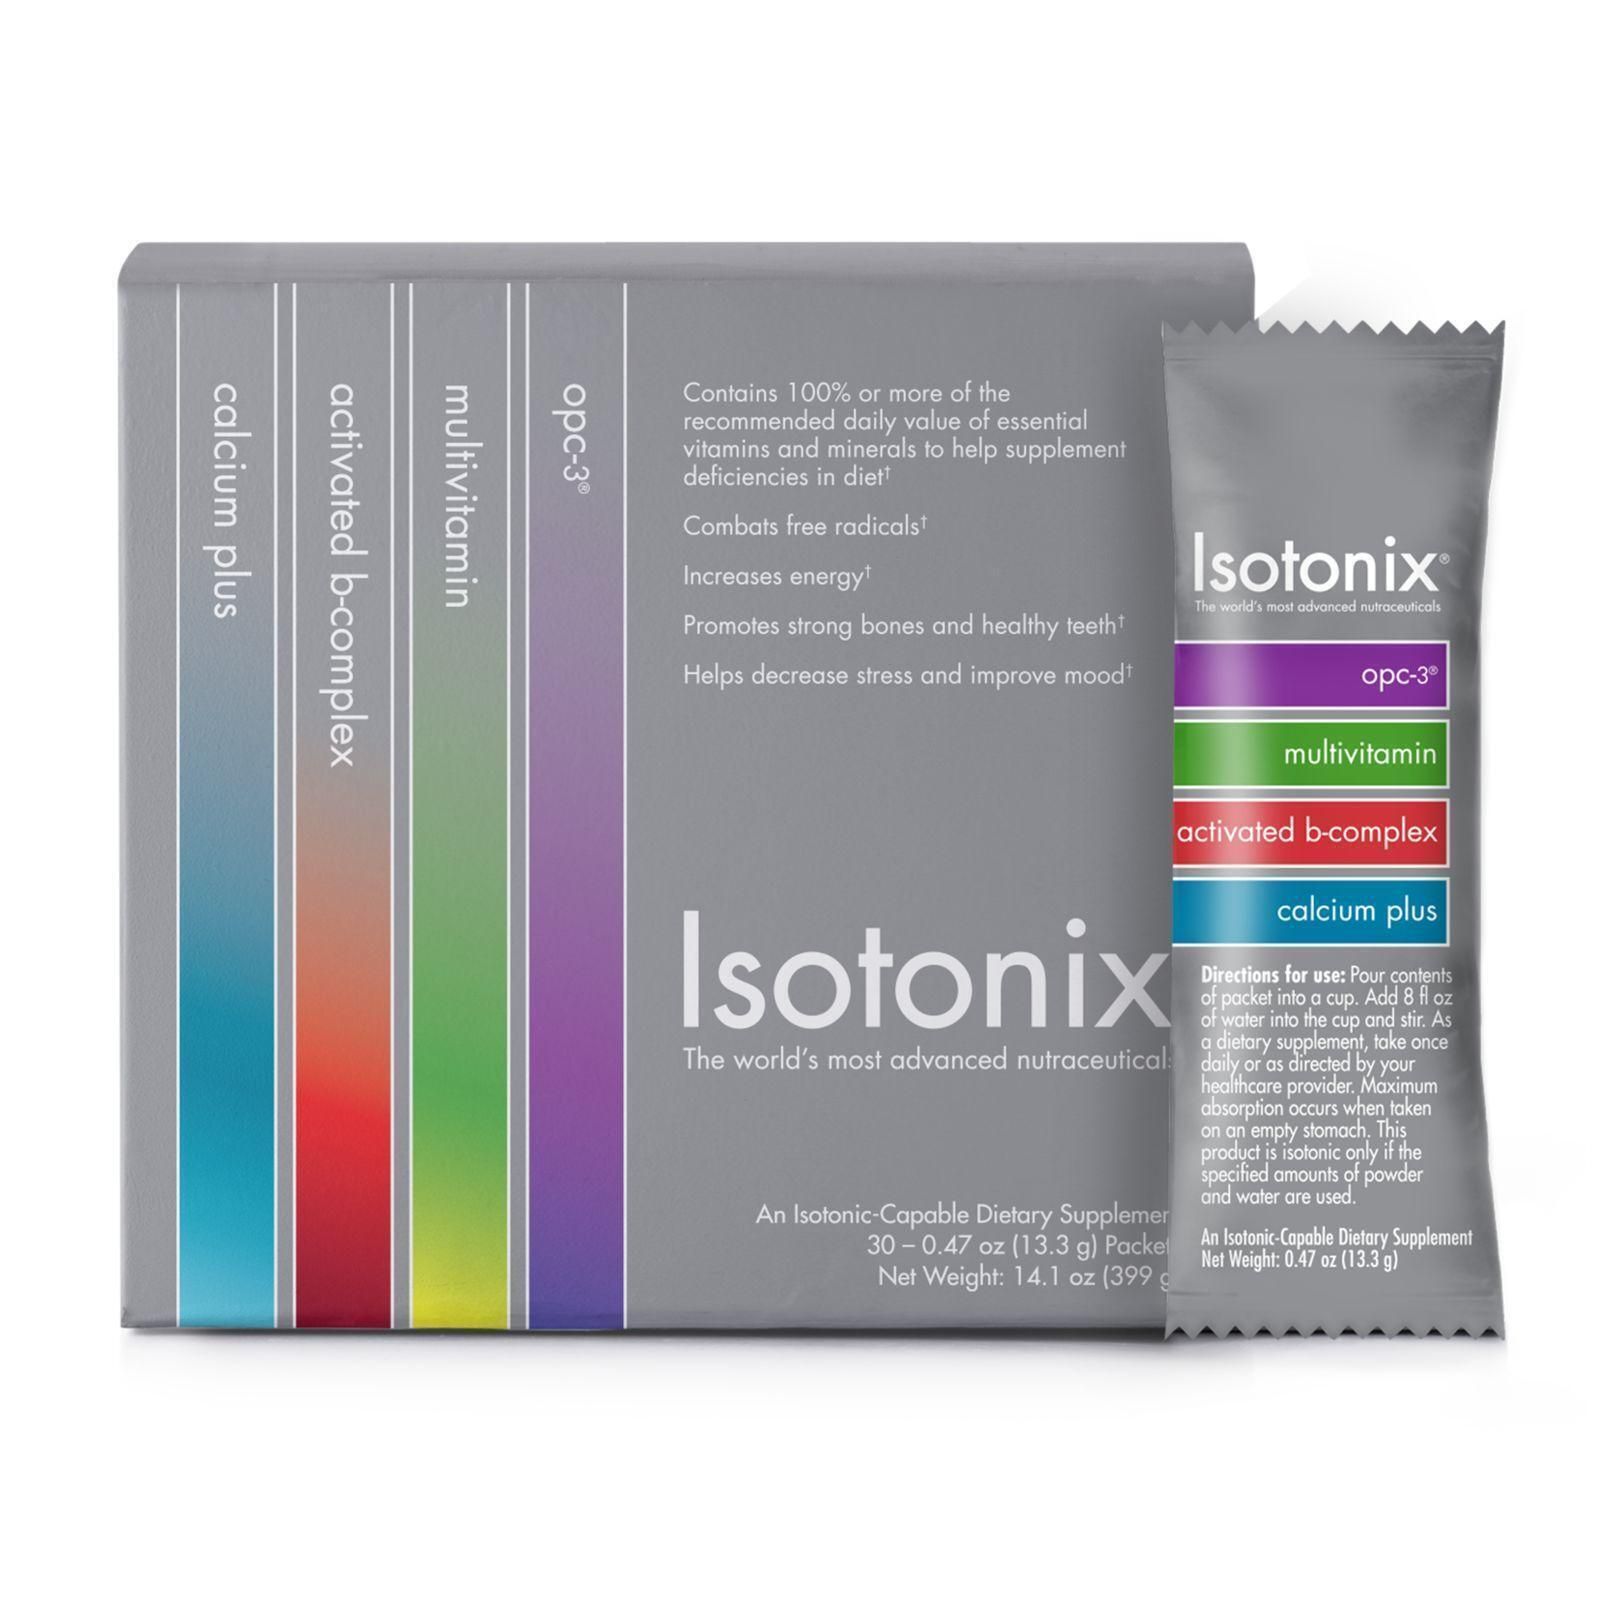 A box of isotonix next to a packet of isotonix